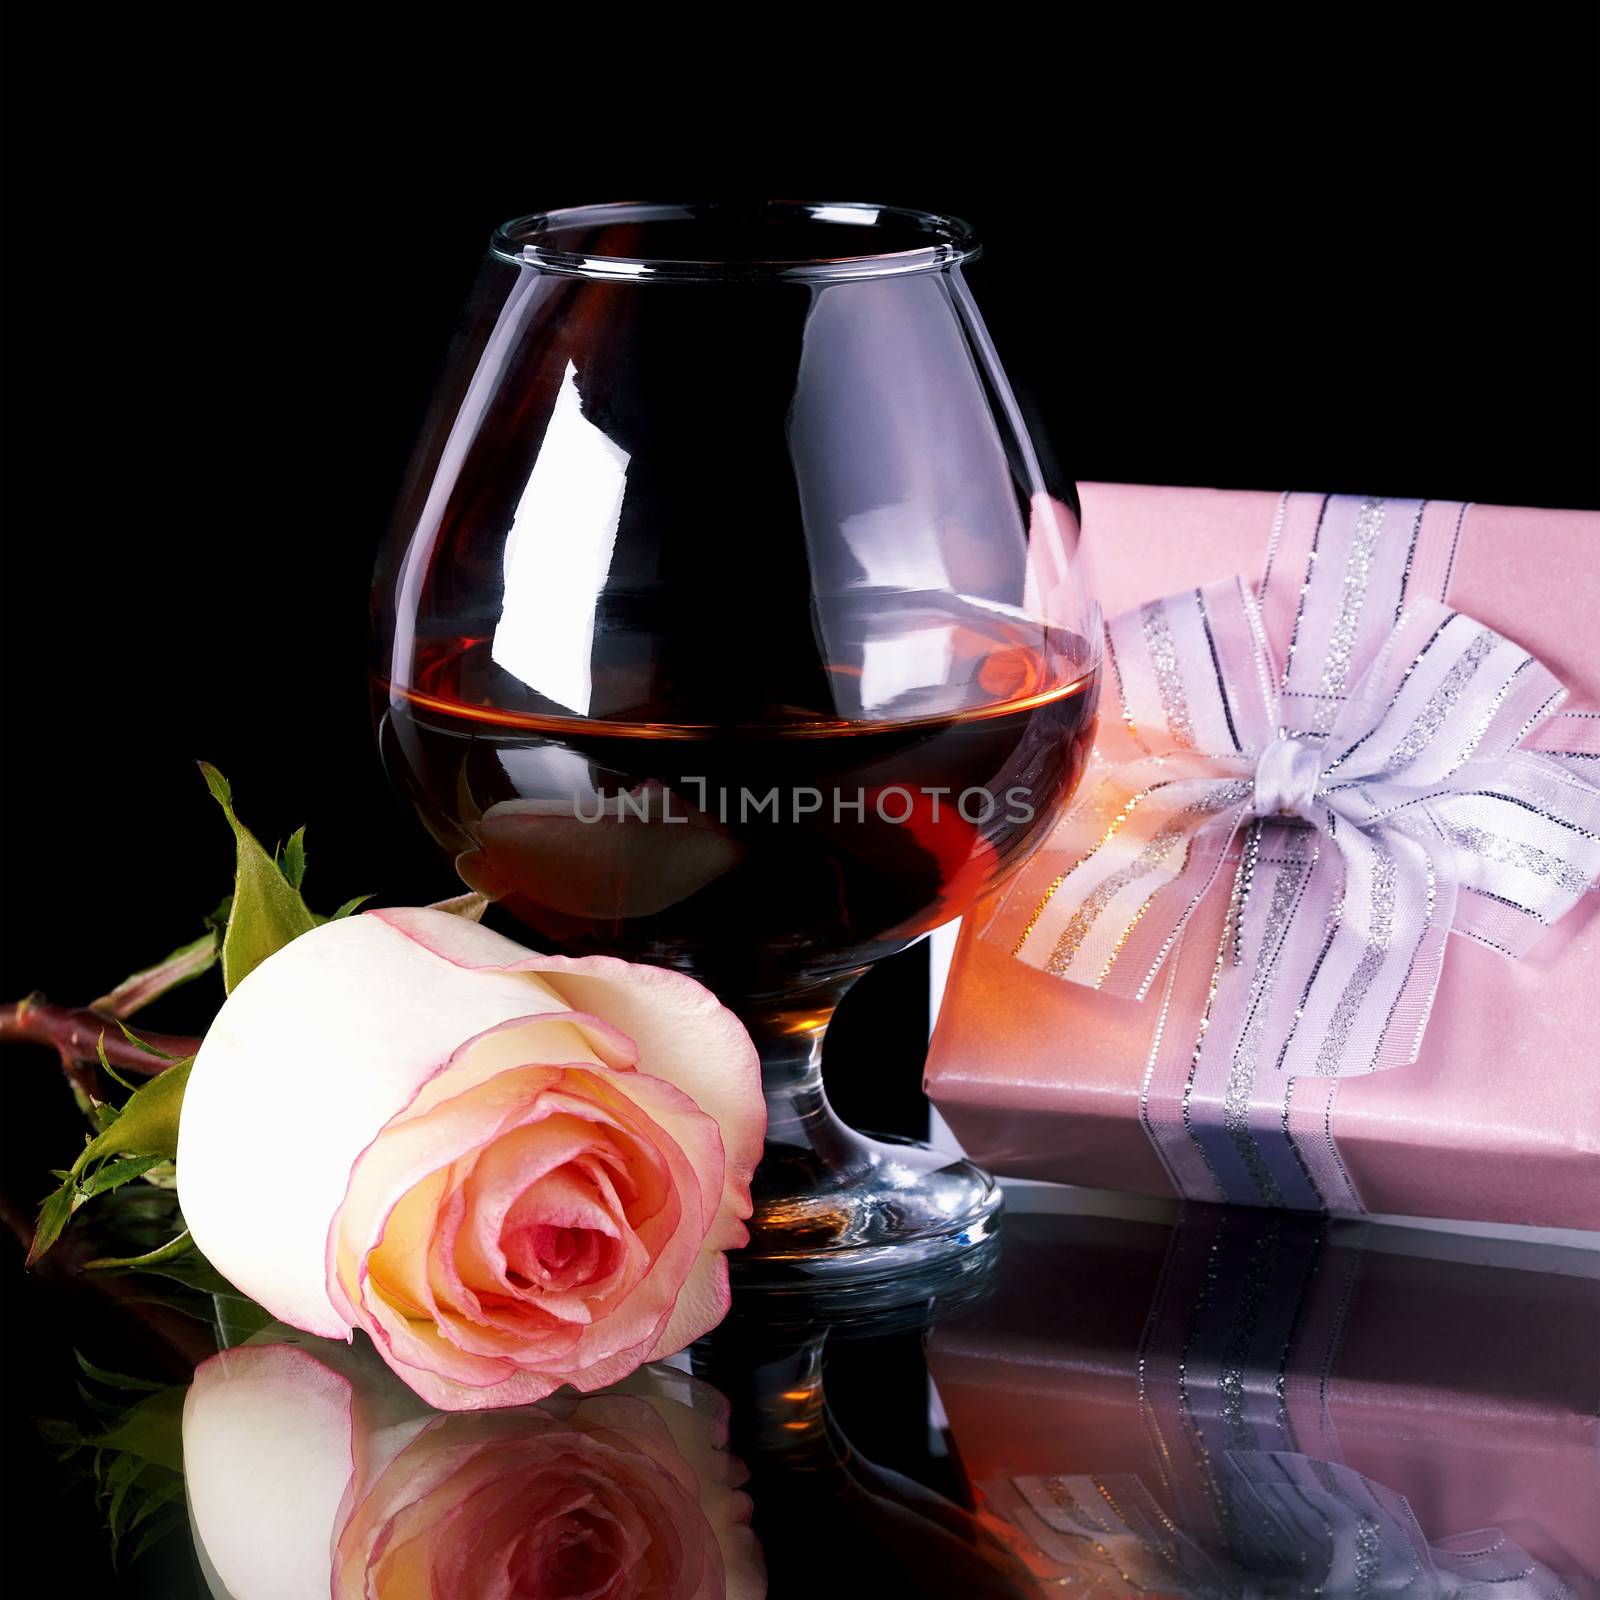 Glass and rose and gift box. Alcohol and flower and gift. Glass with drink and a pink rose and gift.